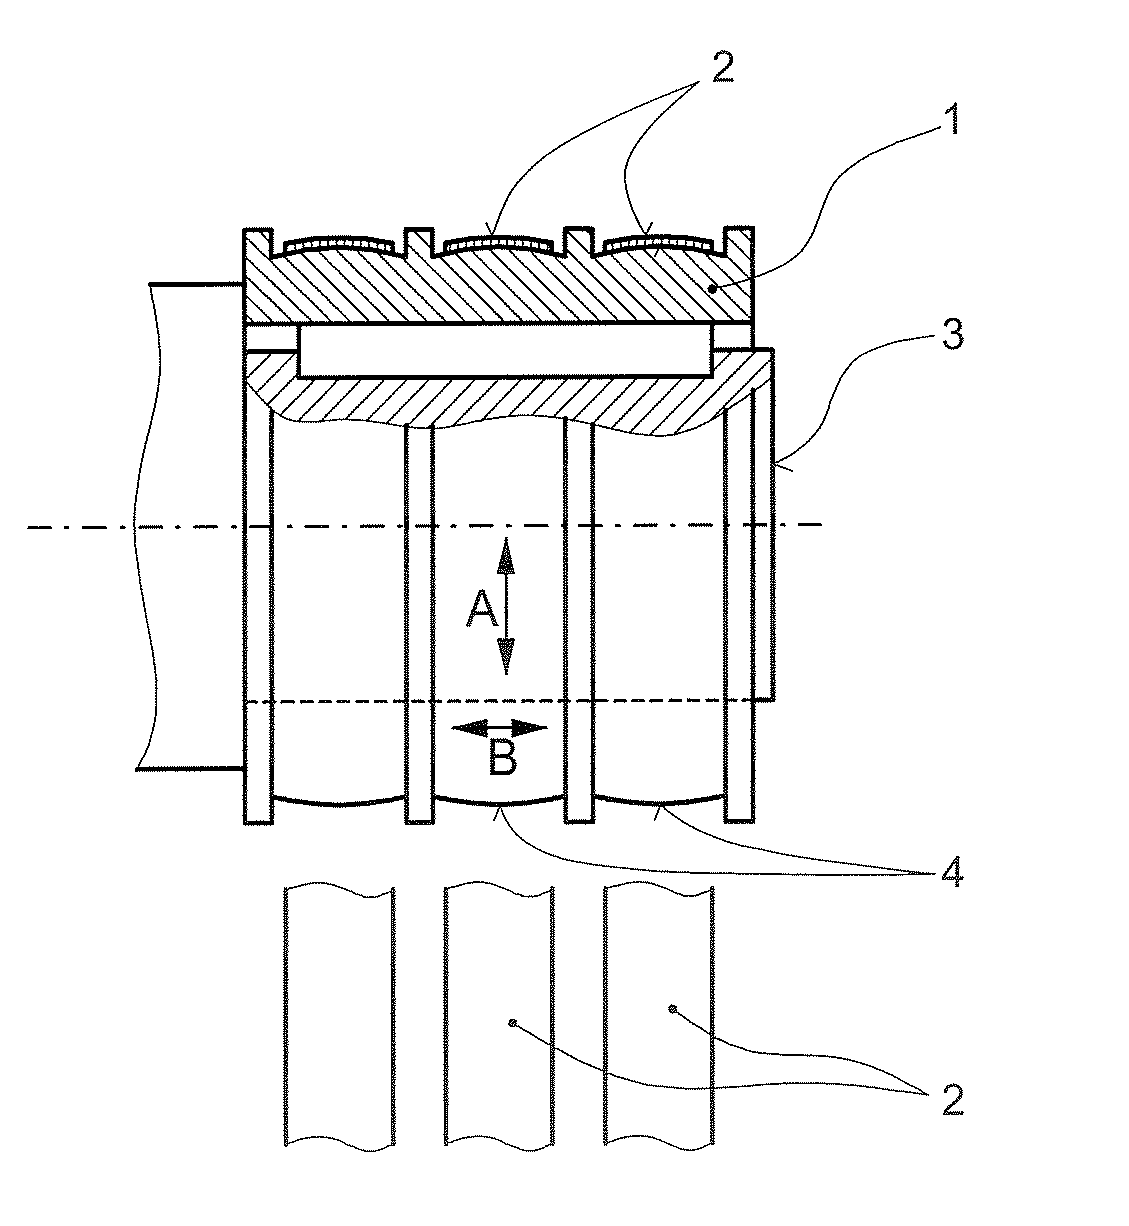 Elevator element for driving or reversing an elevator suspension means in an elevator system